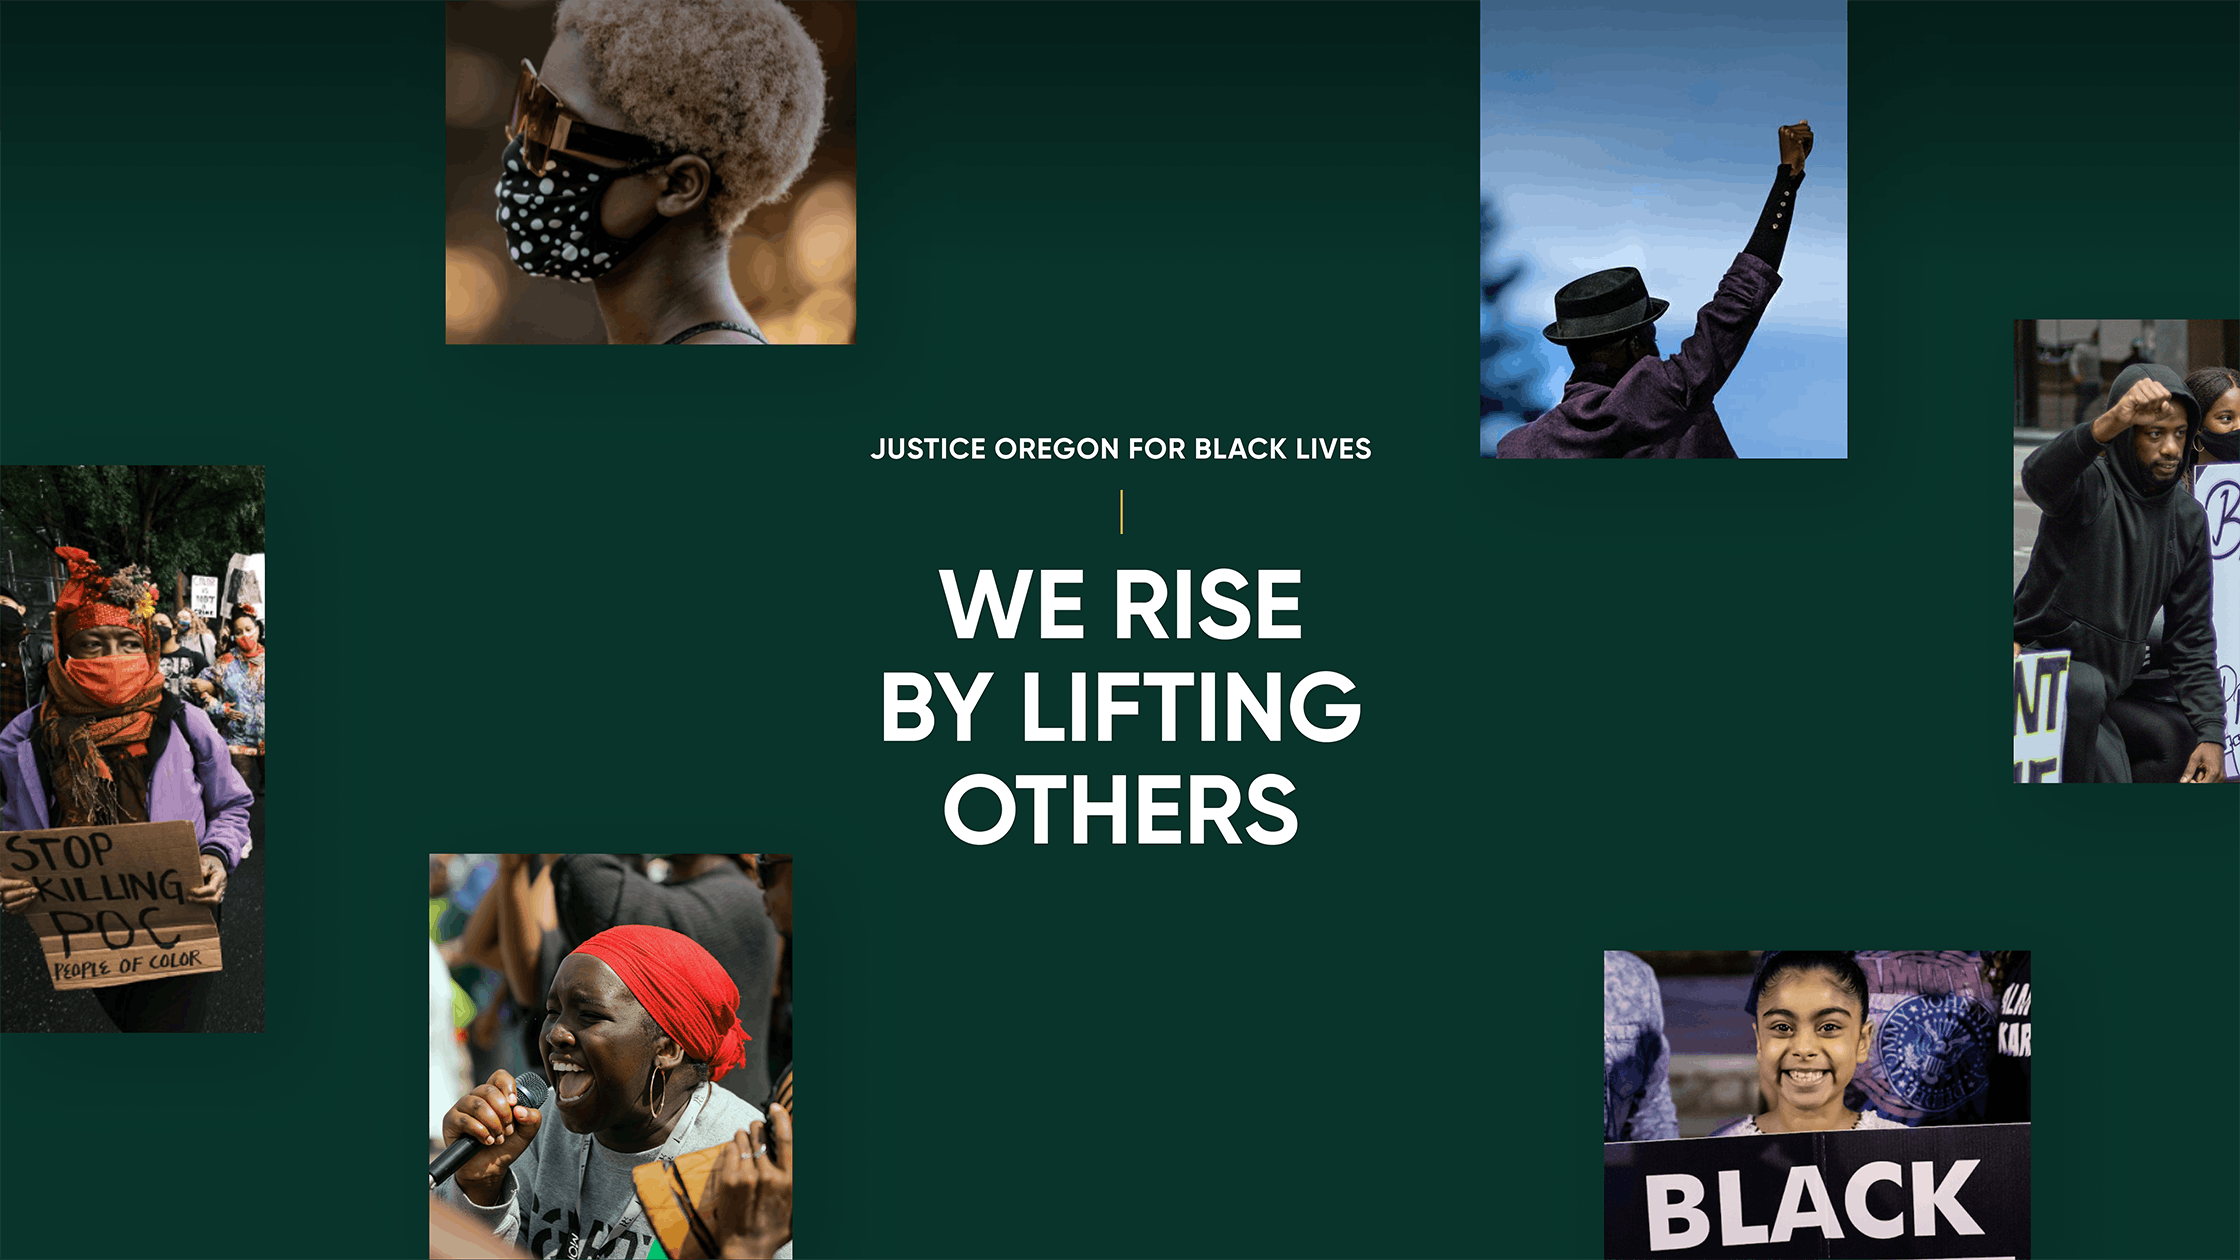 Collage of images featuring support for BLM in Oregon around a central title: "Justice Oregon for Black Lives — We Rise by Lifting Others"